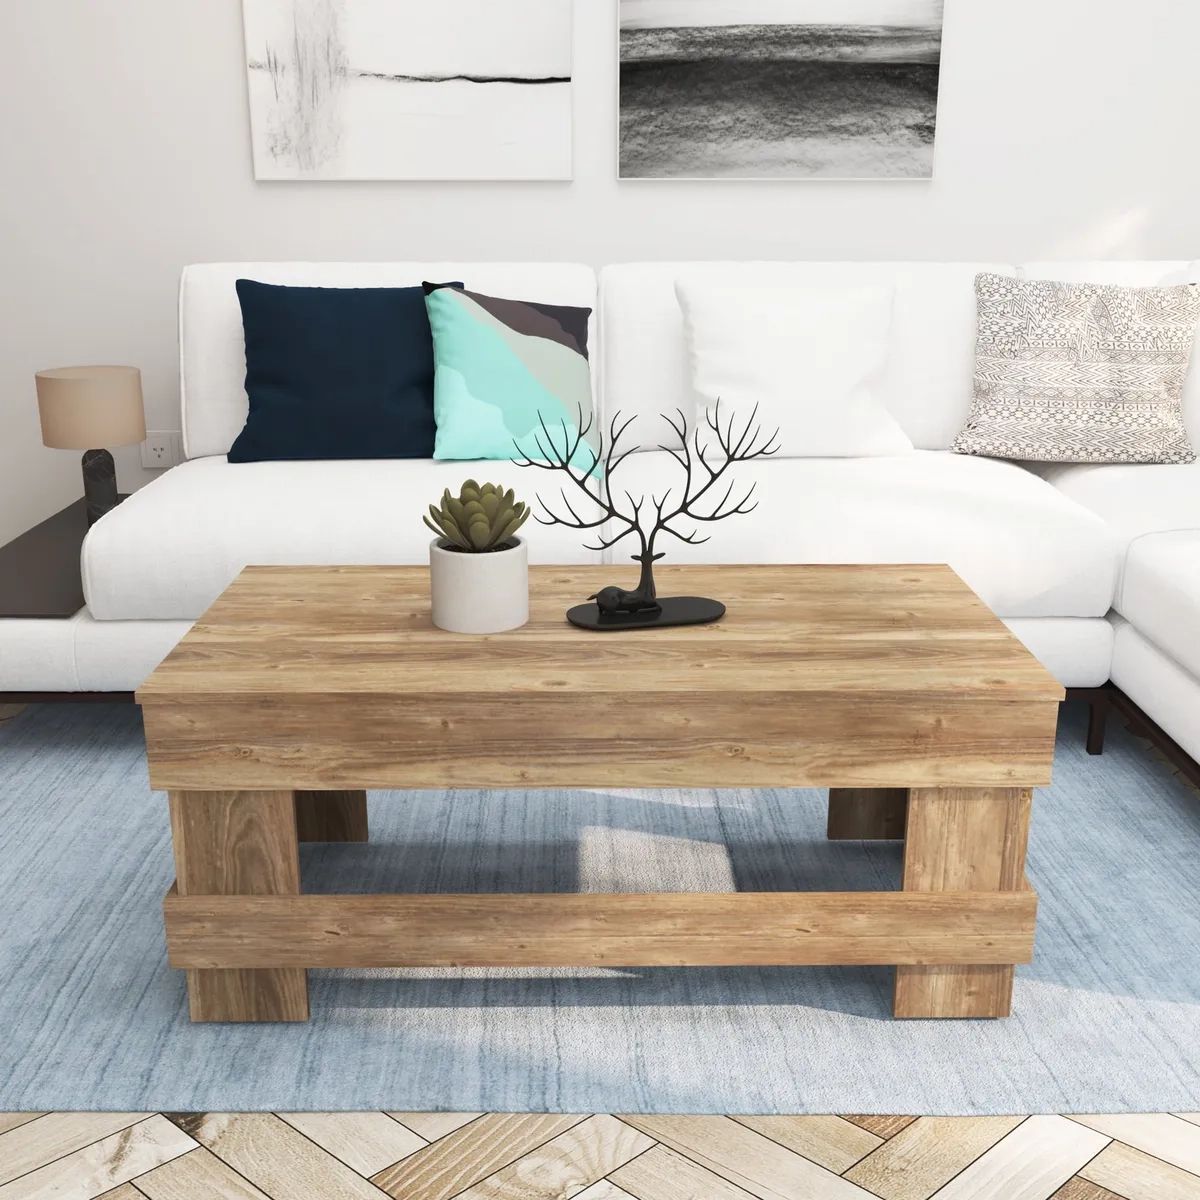 Woven Paths Reclaimed Wood Coffee Table, Natural | Ebay Regarding Woven Paths Coffee Tables (View 14 of 15)